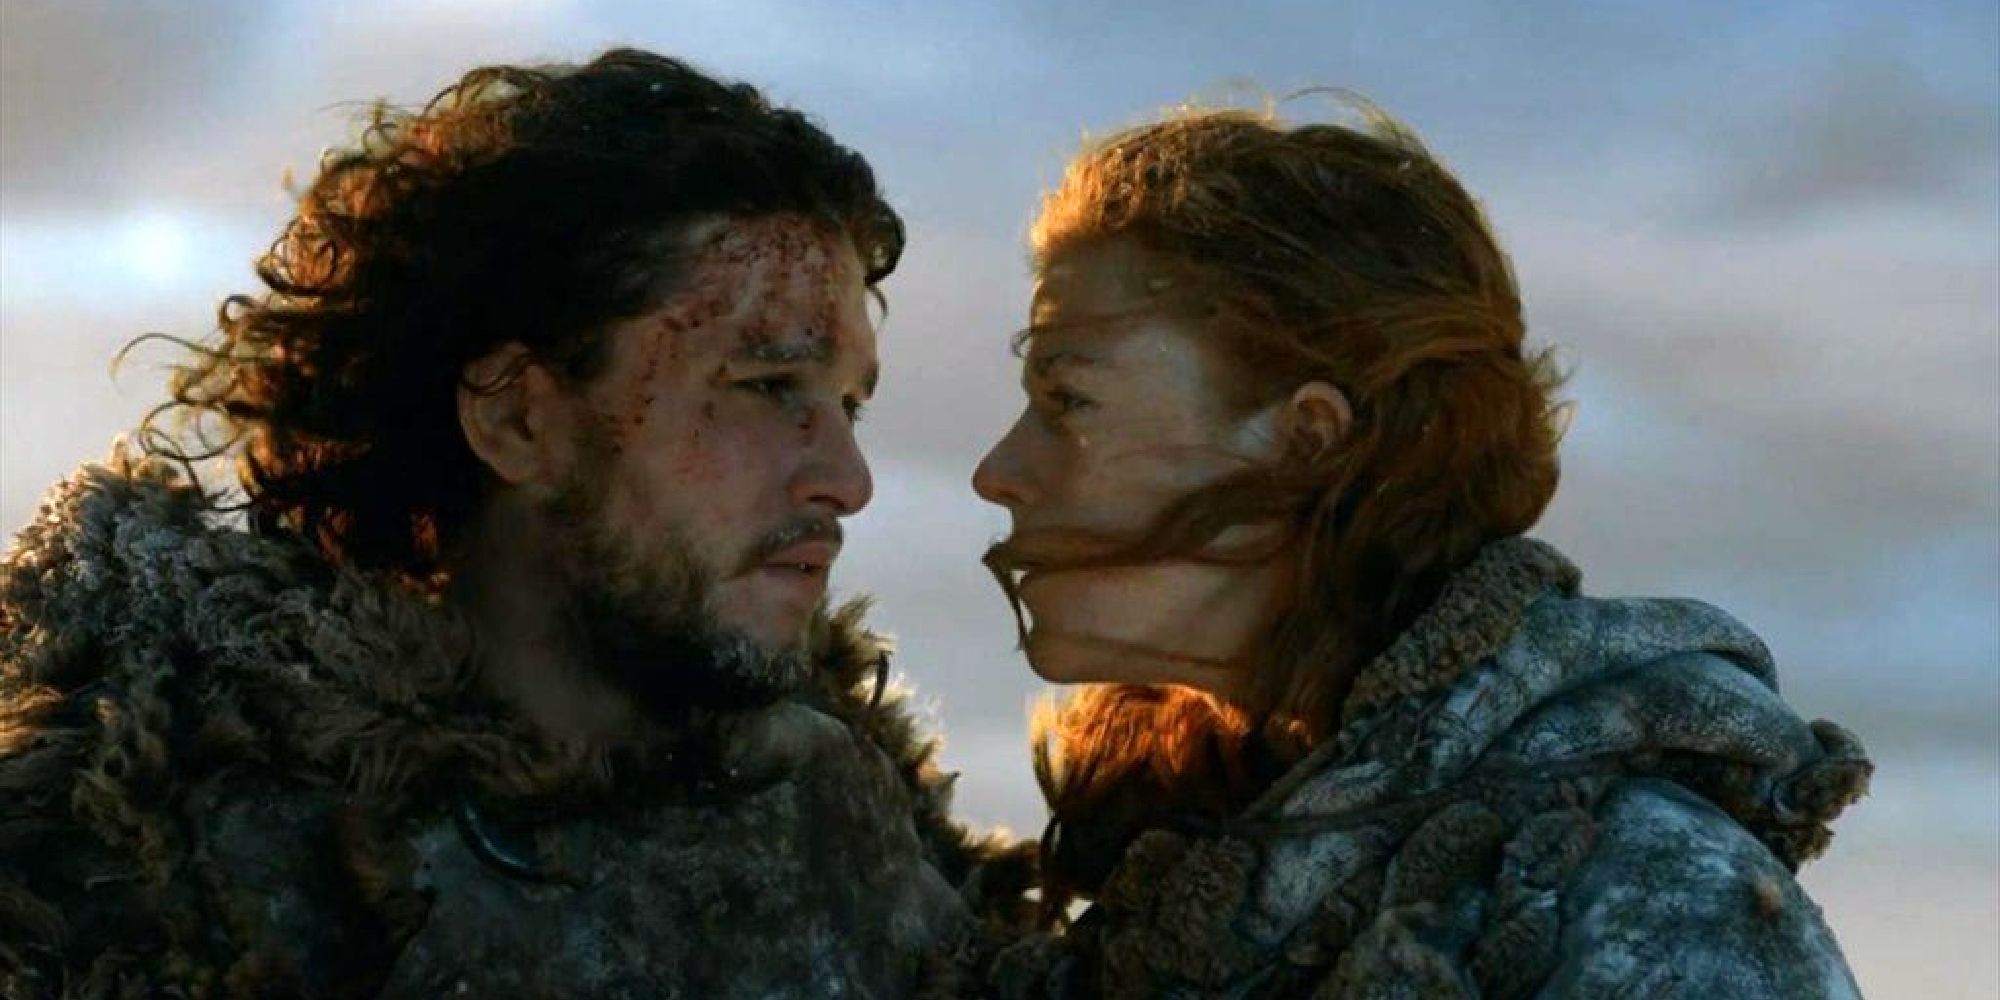 Jon staring at Ygritte after the two successfully climb the Wall